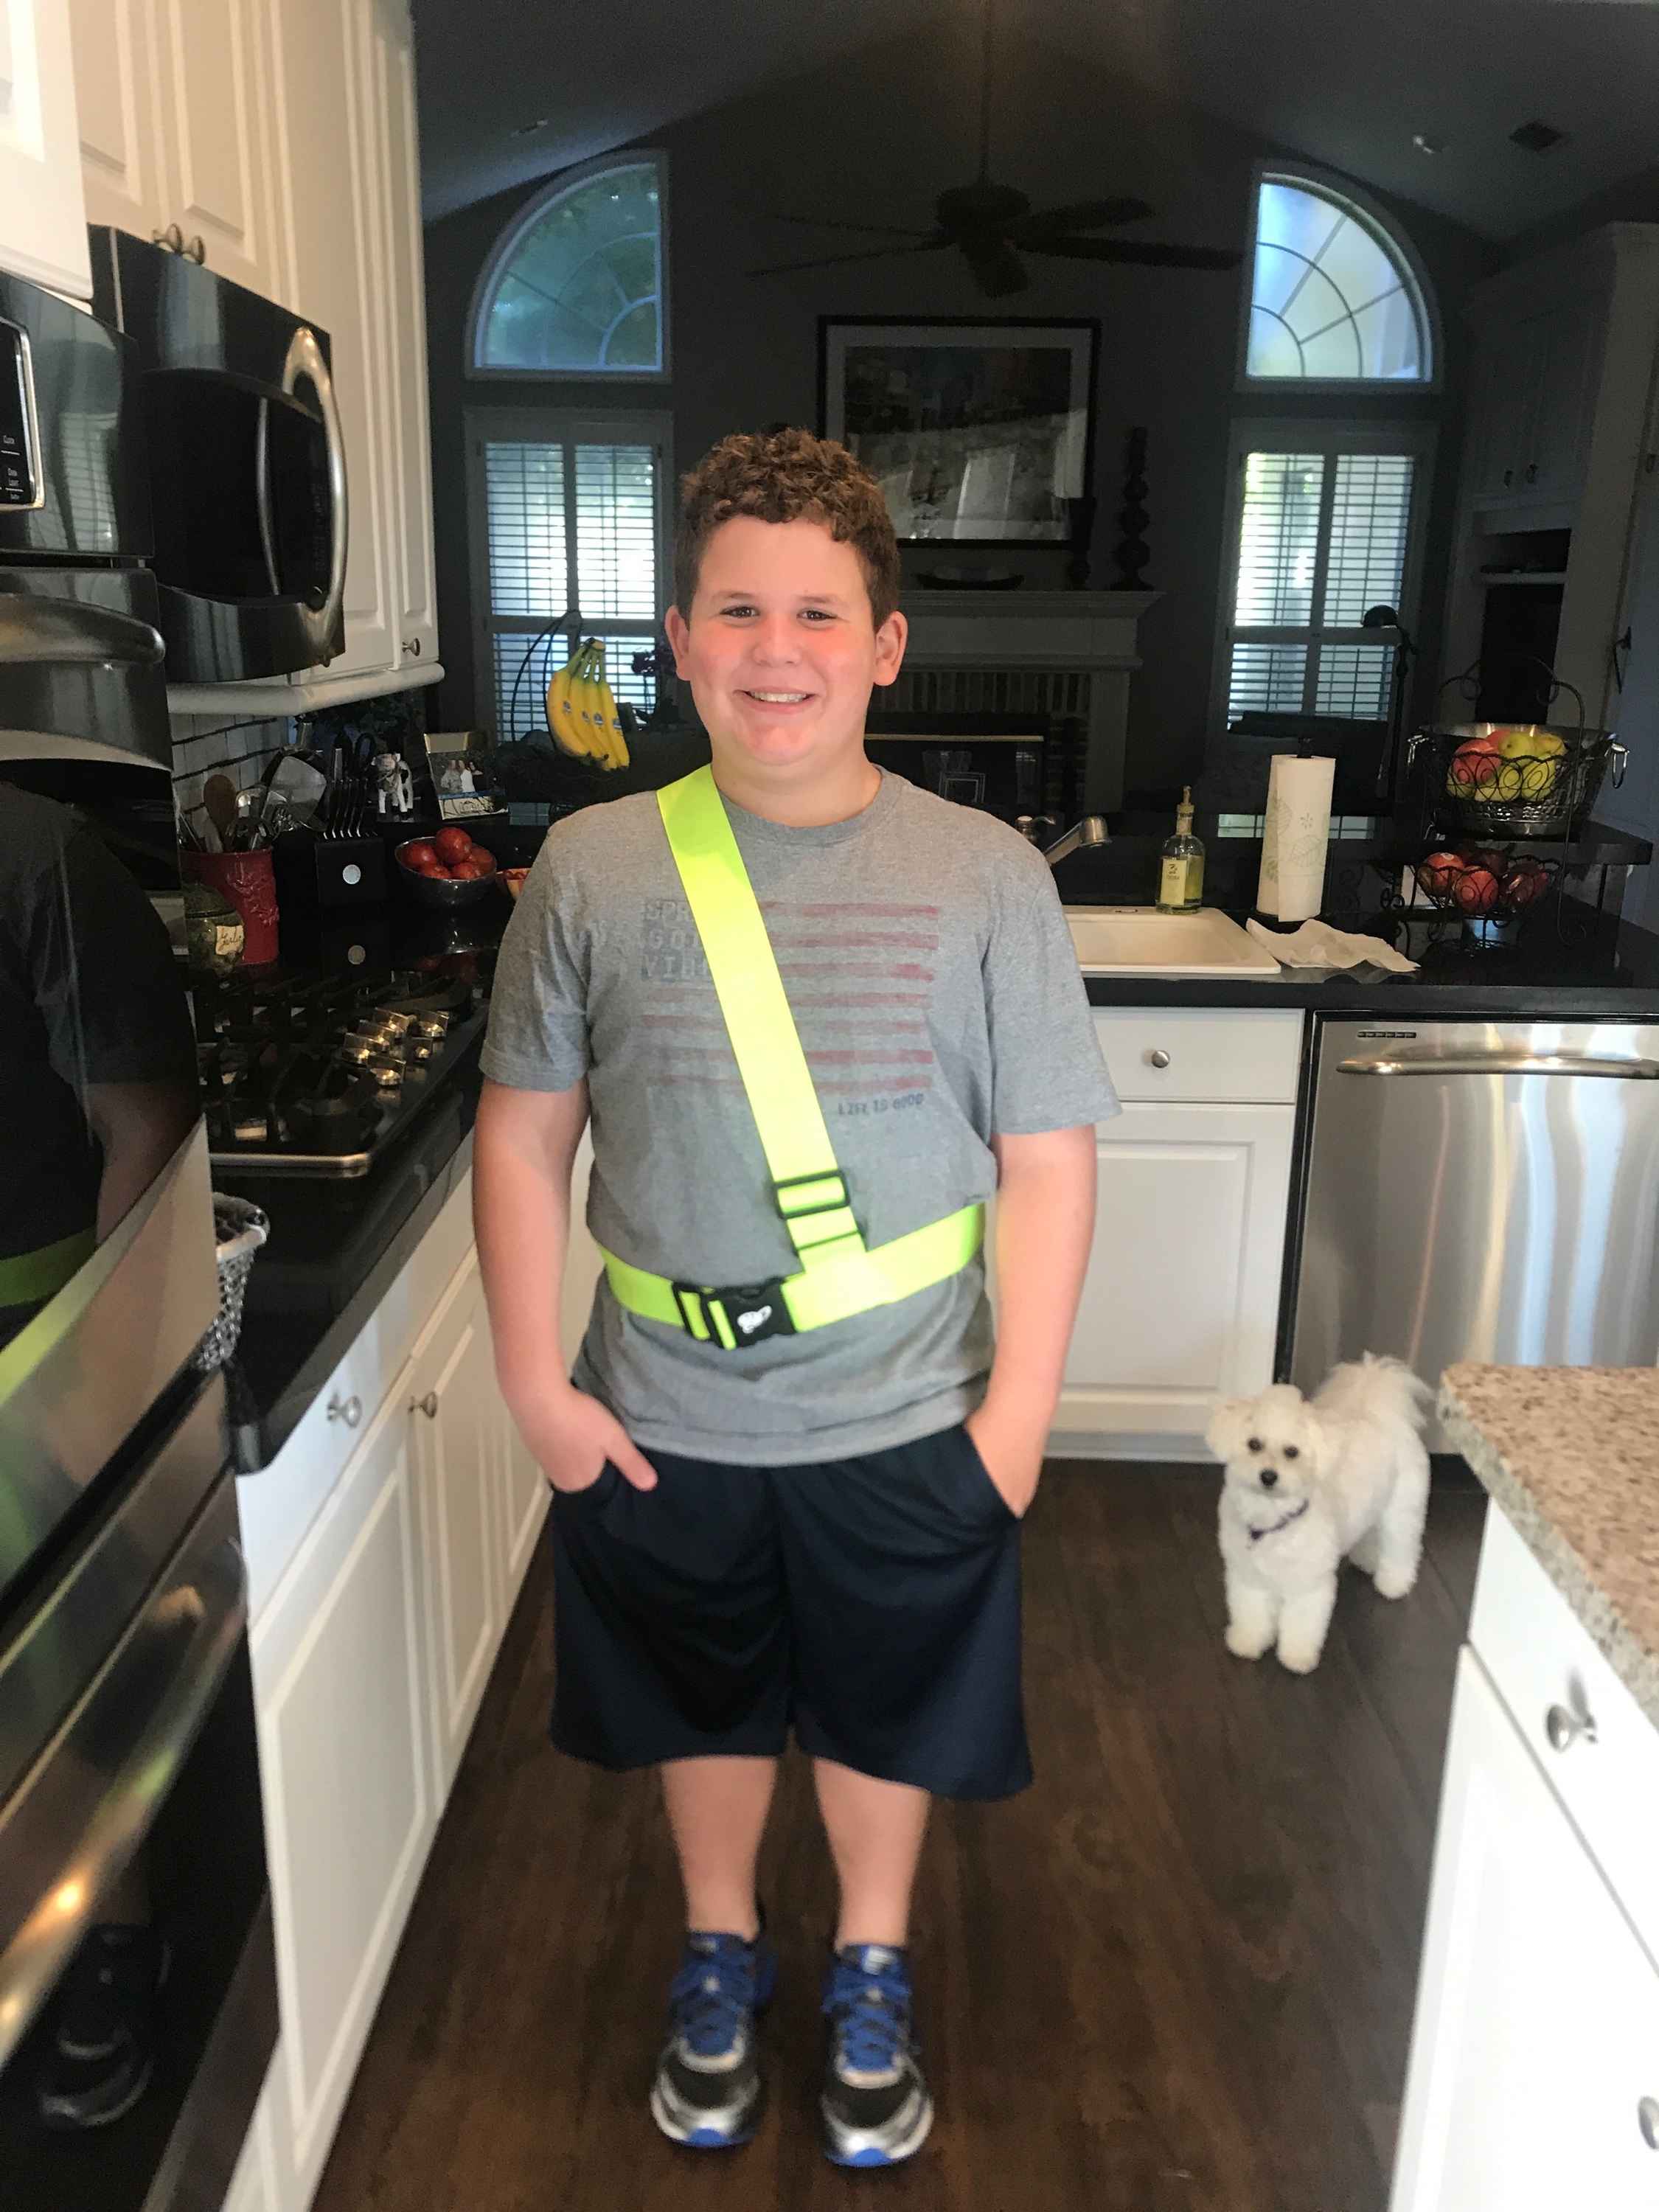 Adam's first day of 5th grade. He is excited to be a safety patrol. I love seeing him so happy.